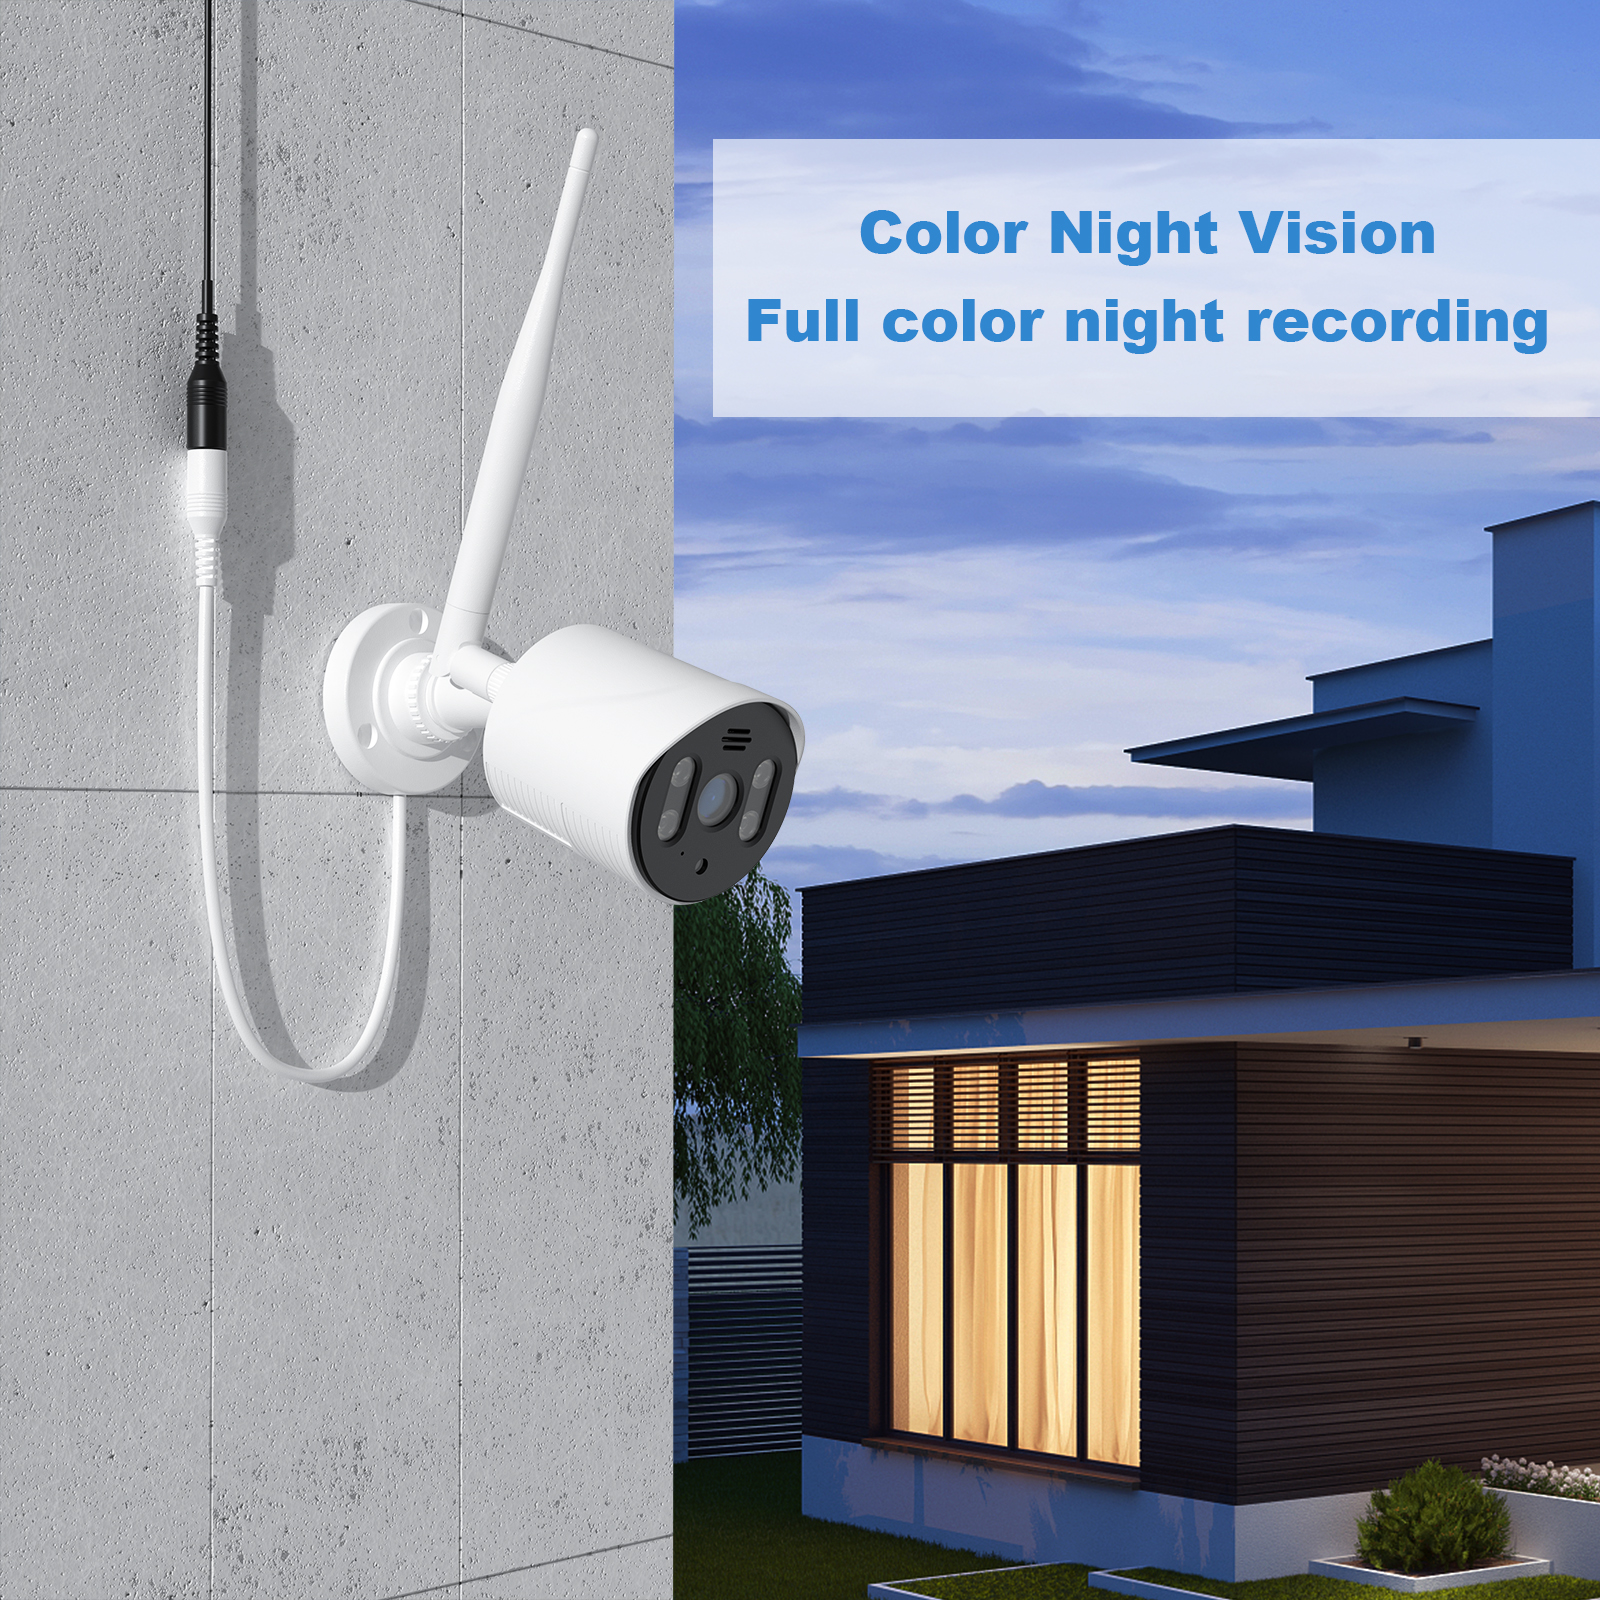 TOPVISION 4pcs Security Wired Camera System, 8CH 3MP NVR Home Security, 1080P IP Security Surveillance Cameras with Color Night Vision, IP66 Waterproof, for Indoor Outdoor, No HDD (Wireless Wi-Fi) - image 3 of 9